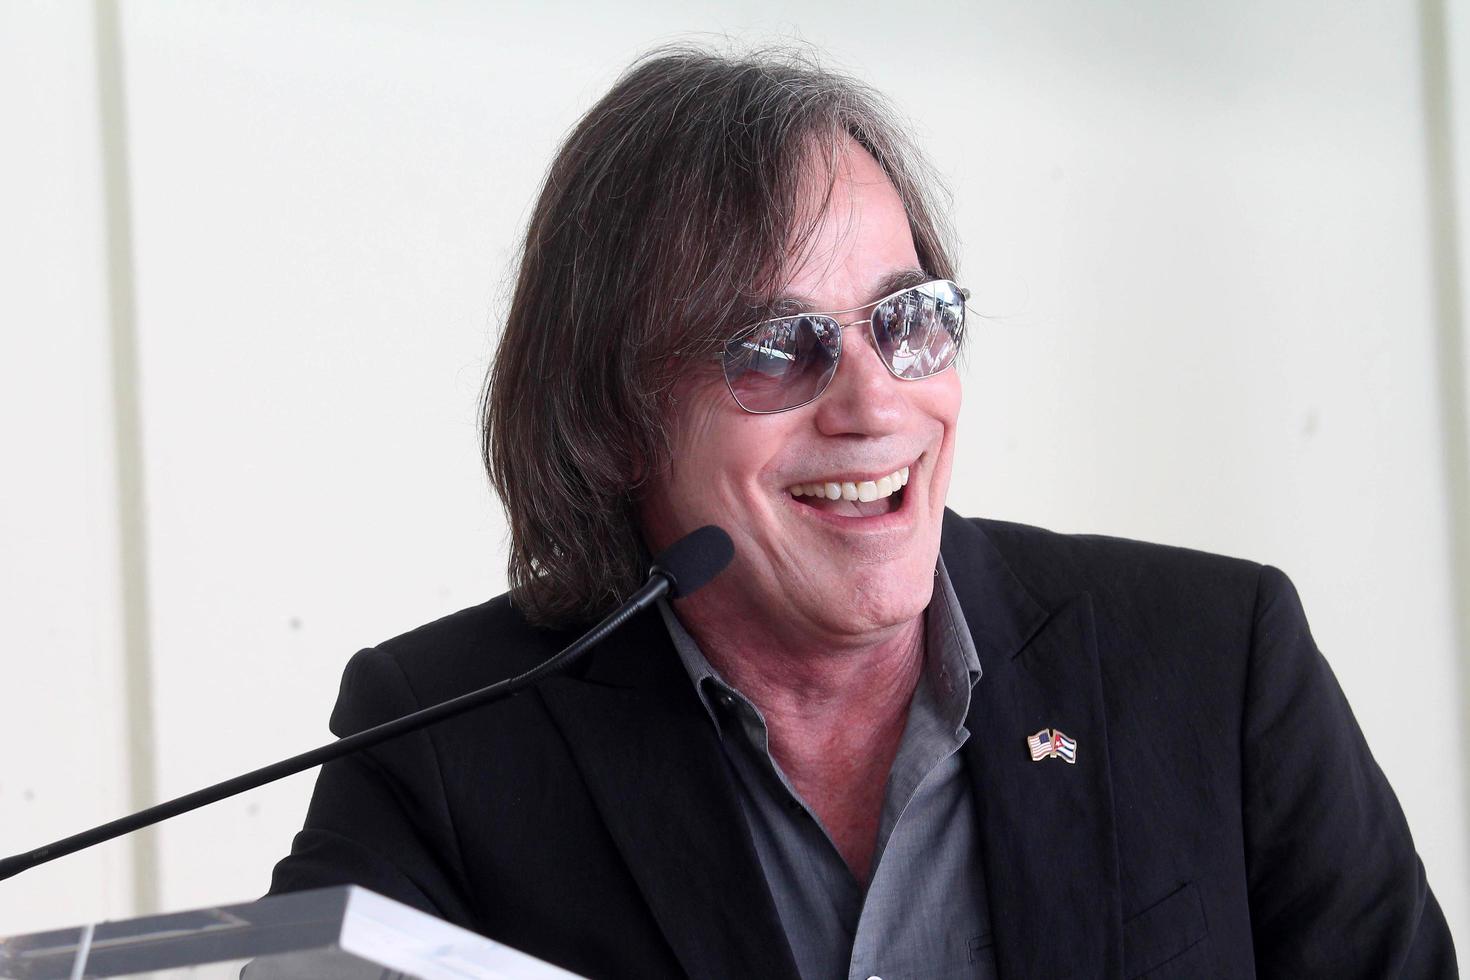 LOS ANGELES, AUG 27 -  Jackson Browne at the Joe Smith Star on the Hollywood Walk of Fame at the Capital Records Building on August 27, 2015 in Los Angeles, CA photo